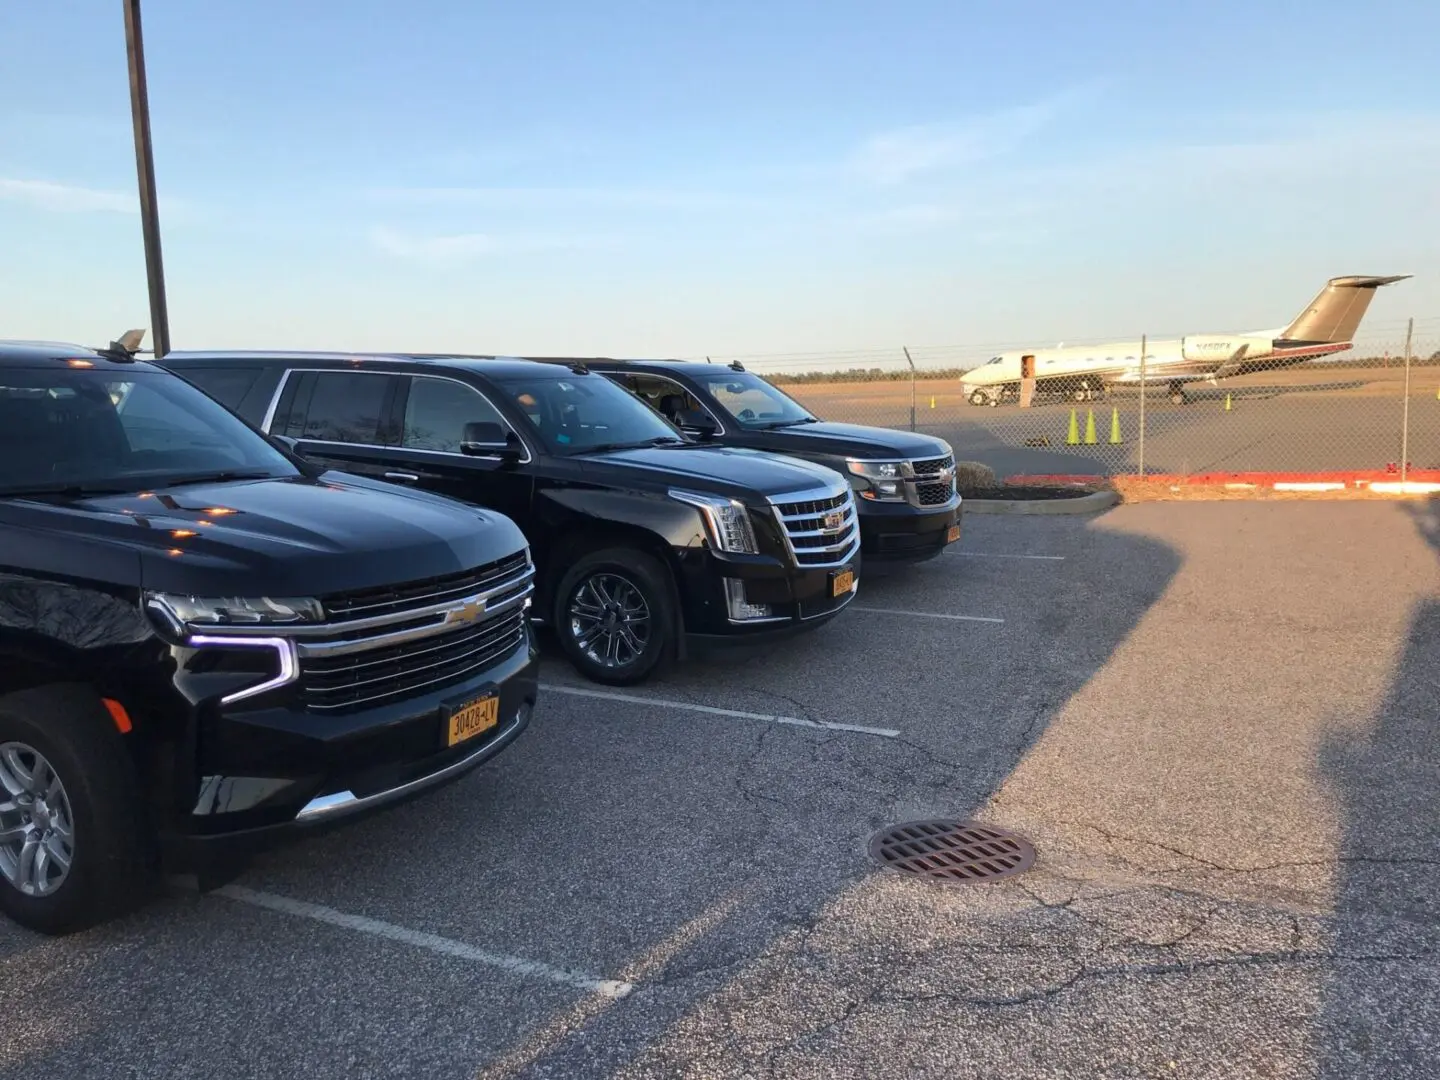 A row of black cars parked in a parking lot.